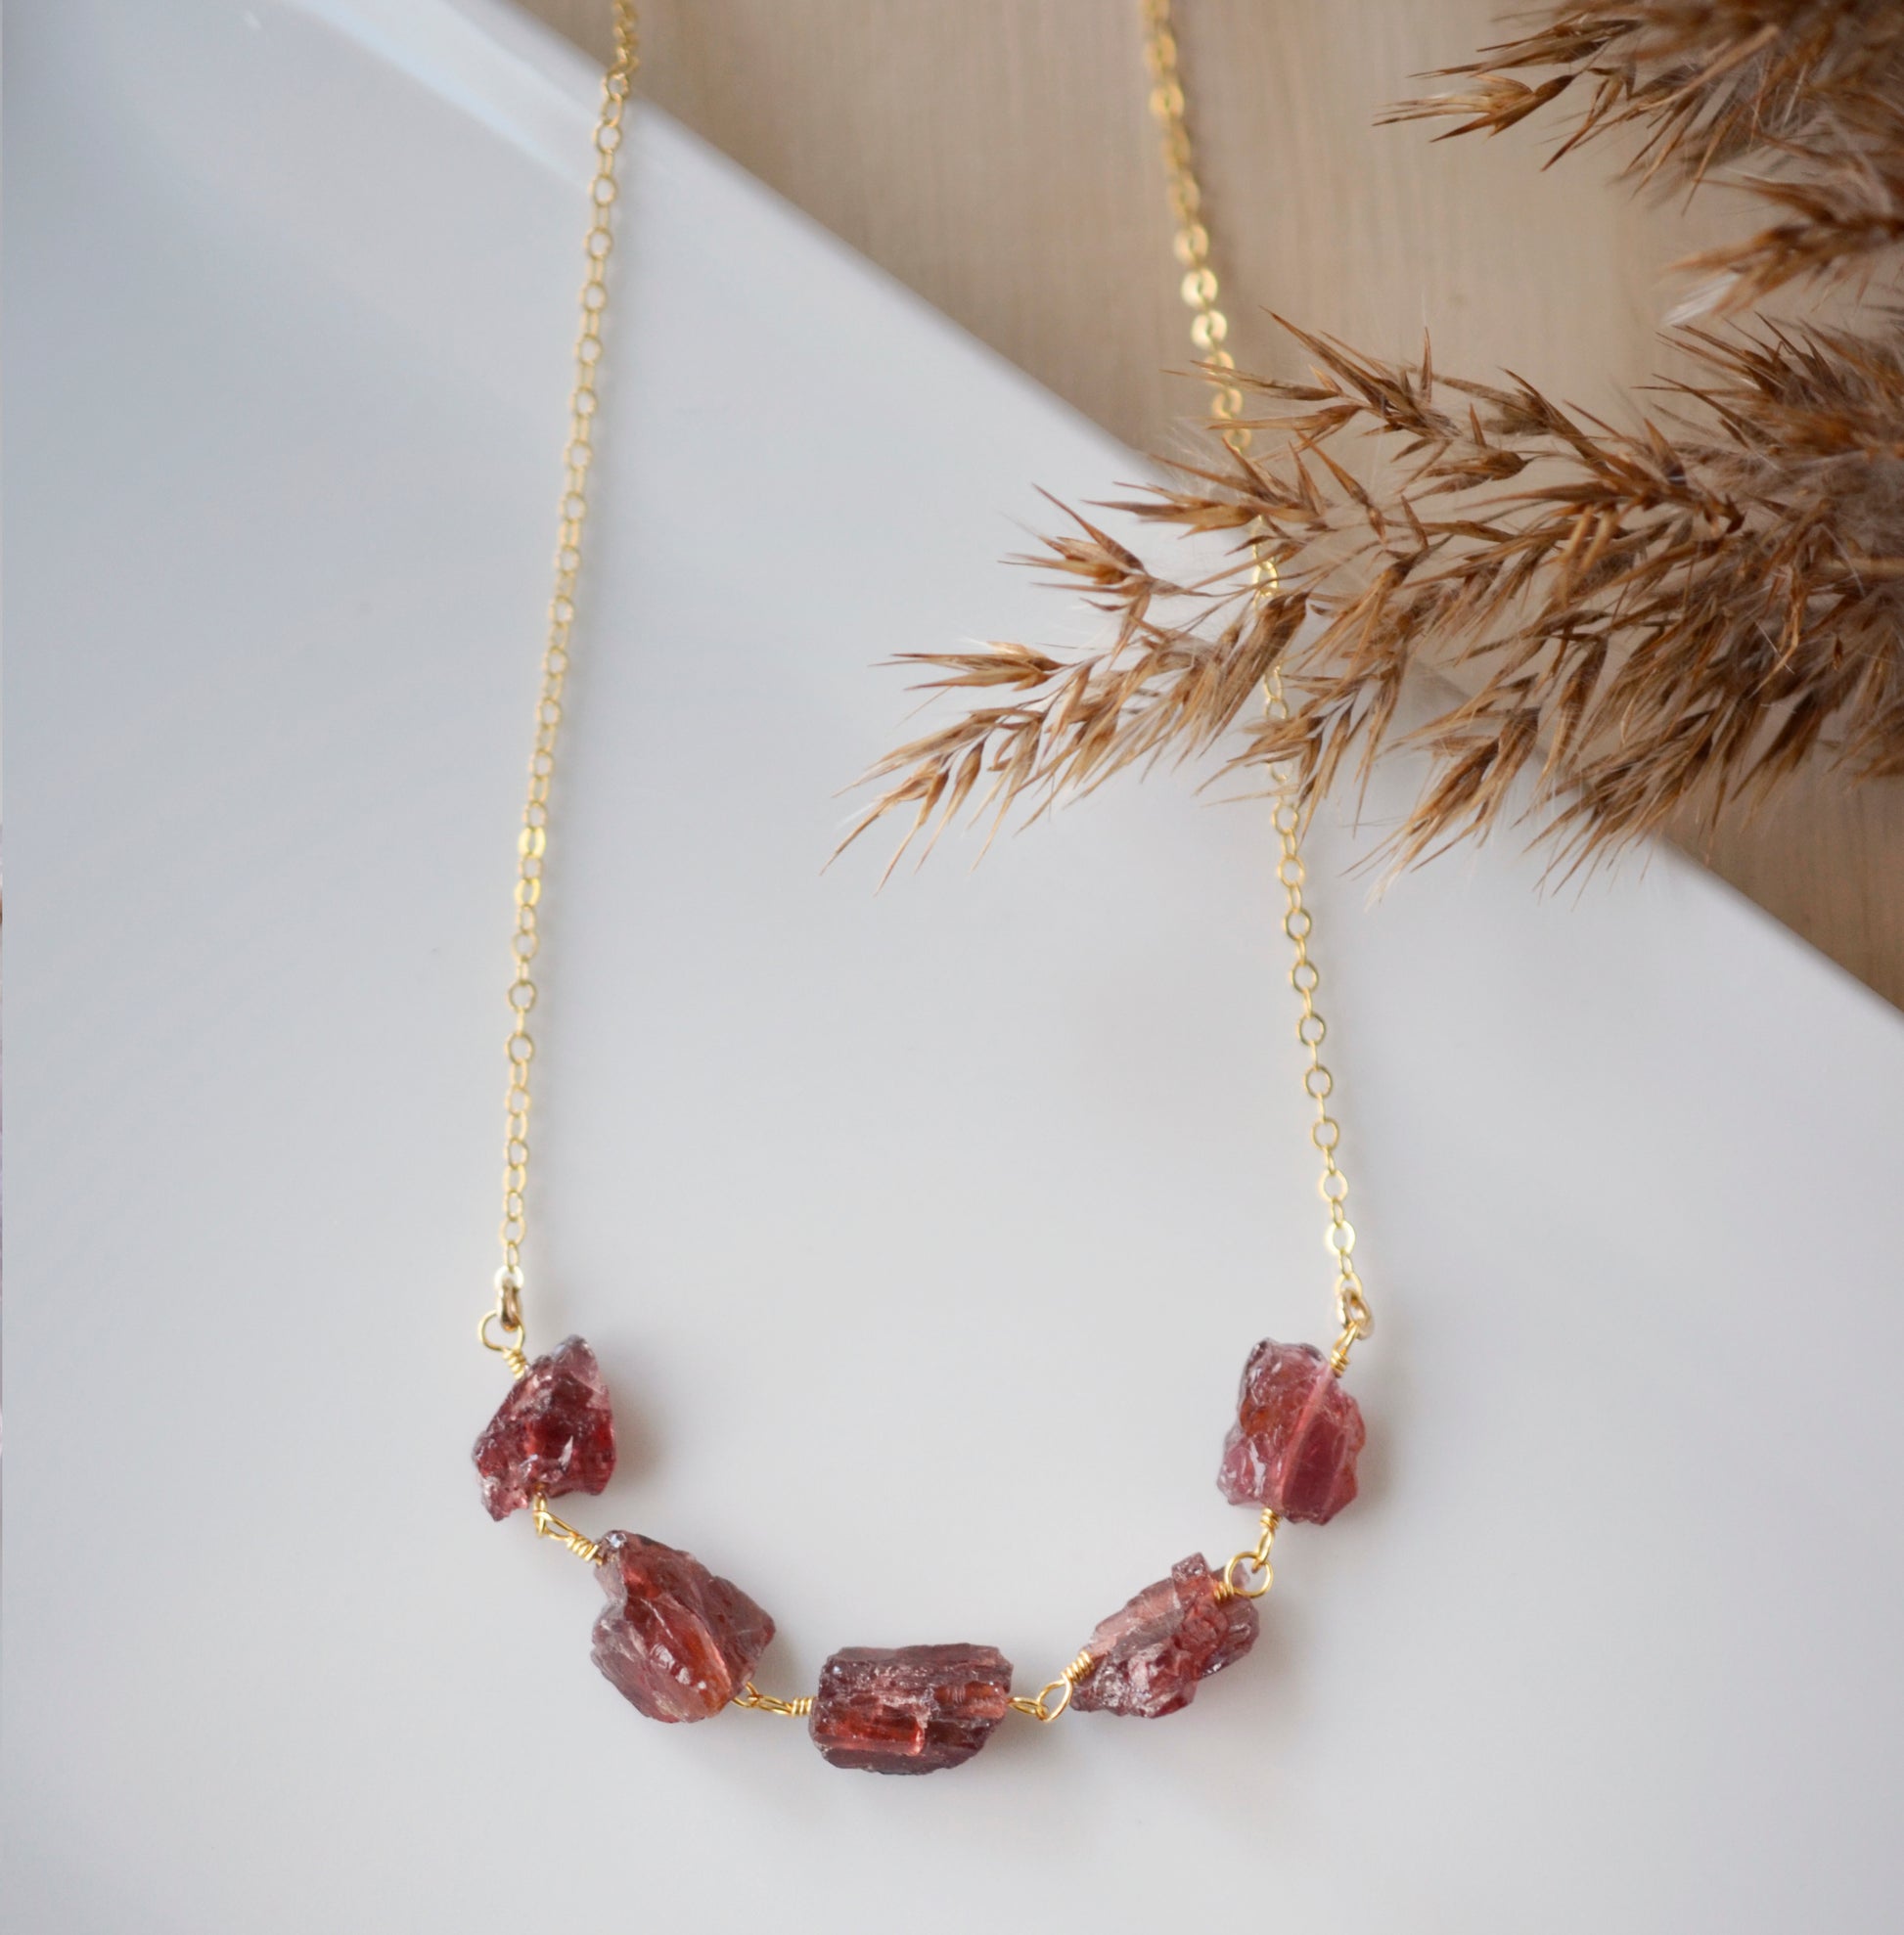 Genuine Garnet Necklace, Sterling Silver or 14K Gold Filled, Raw Crystals - by GEMNIA 16 / Sterling Silver